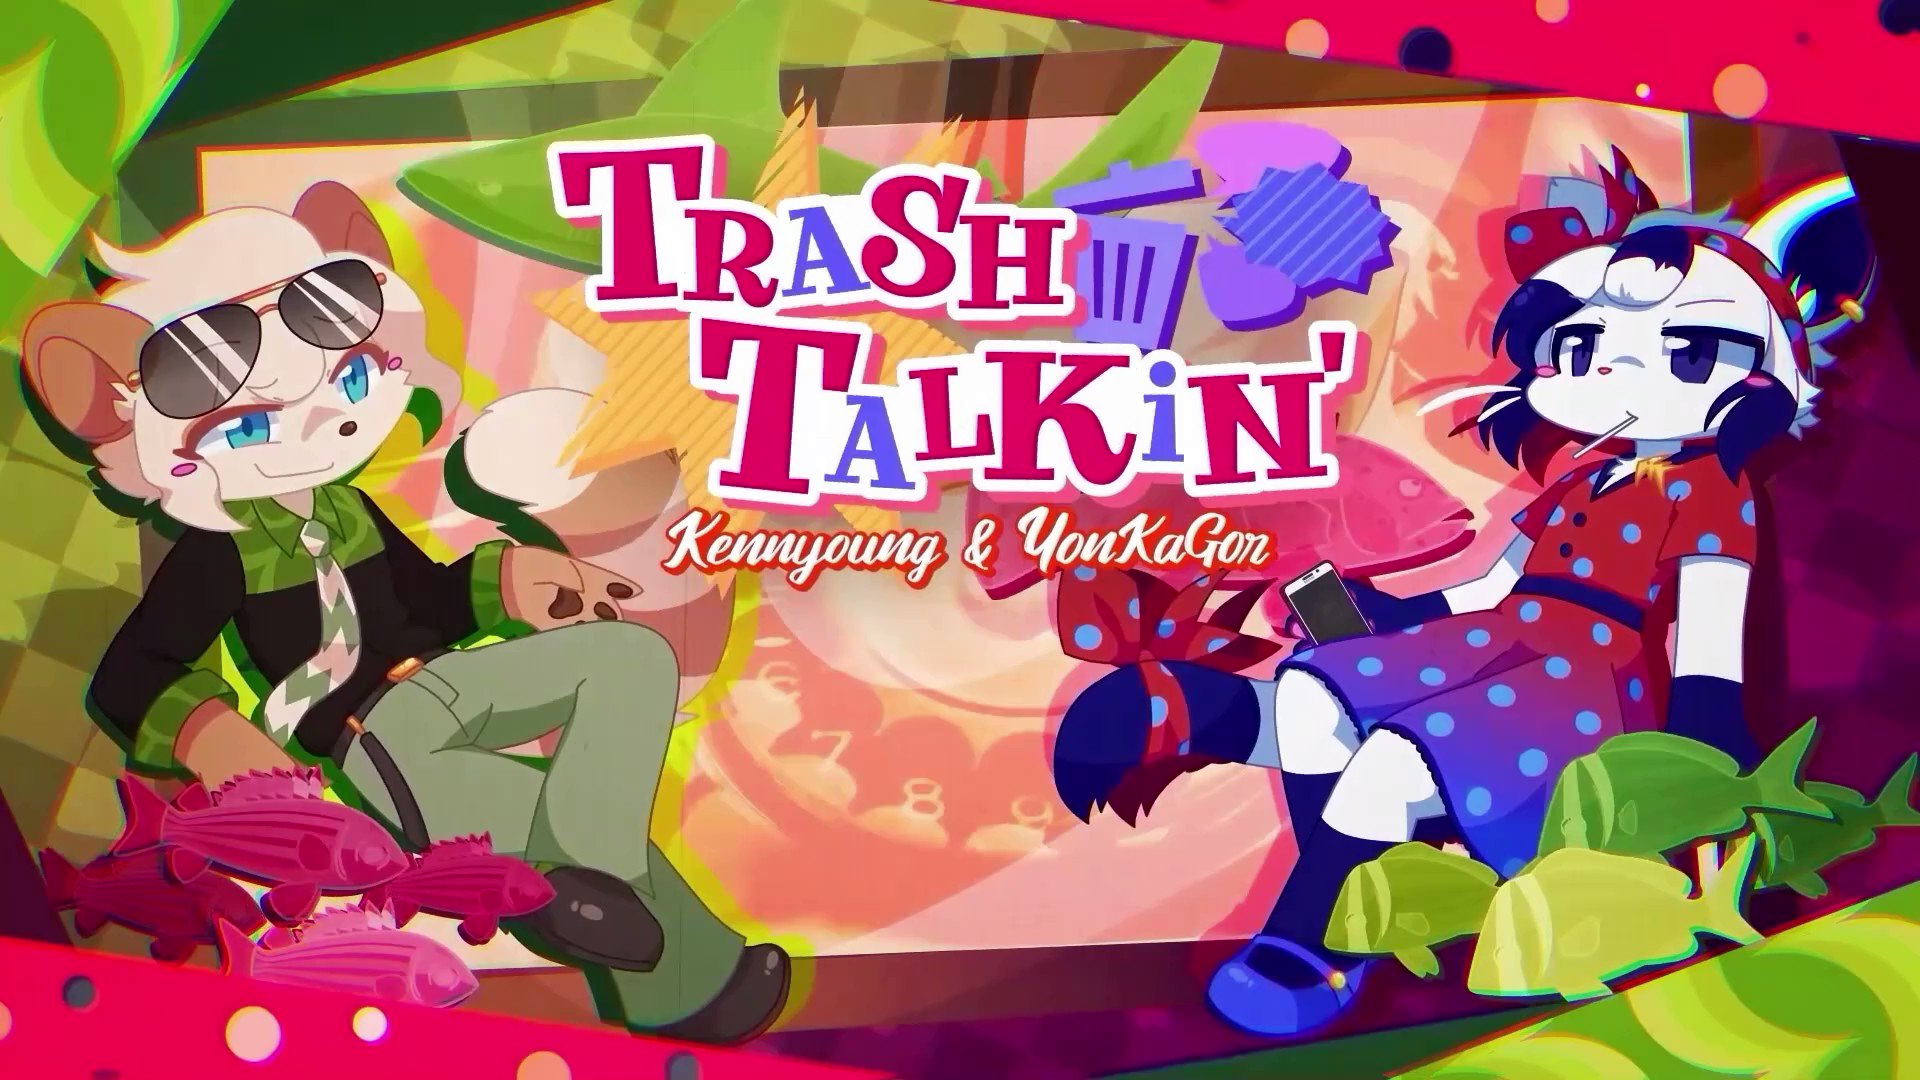 Meaning of Trash Talkin' by YonKaGor (Ft. Kennyoung)